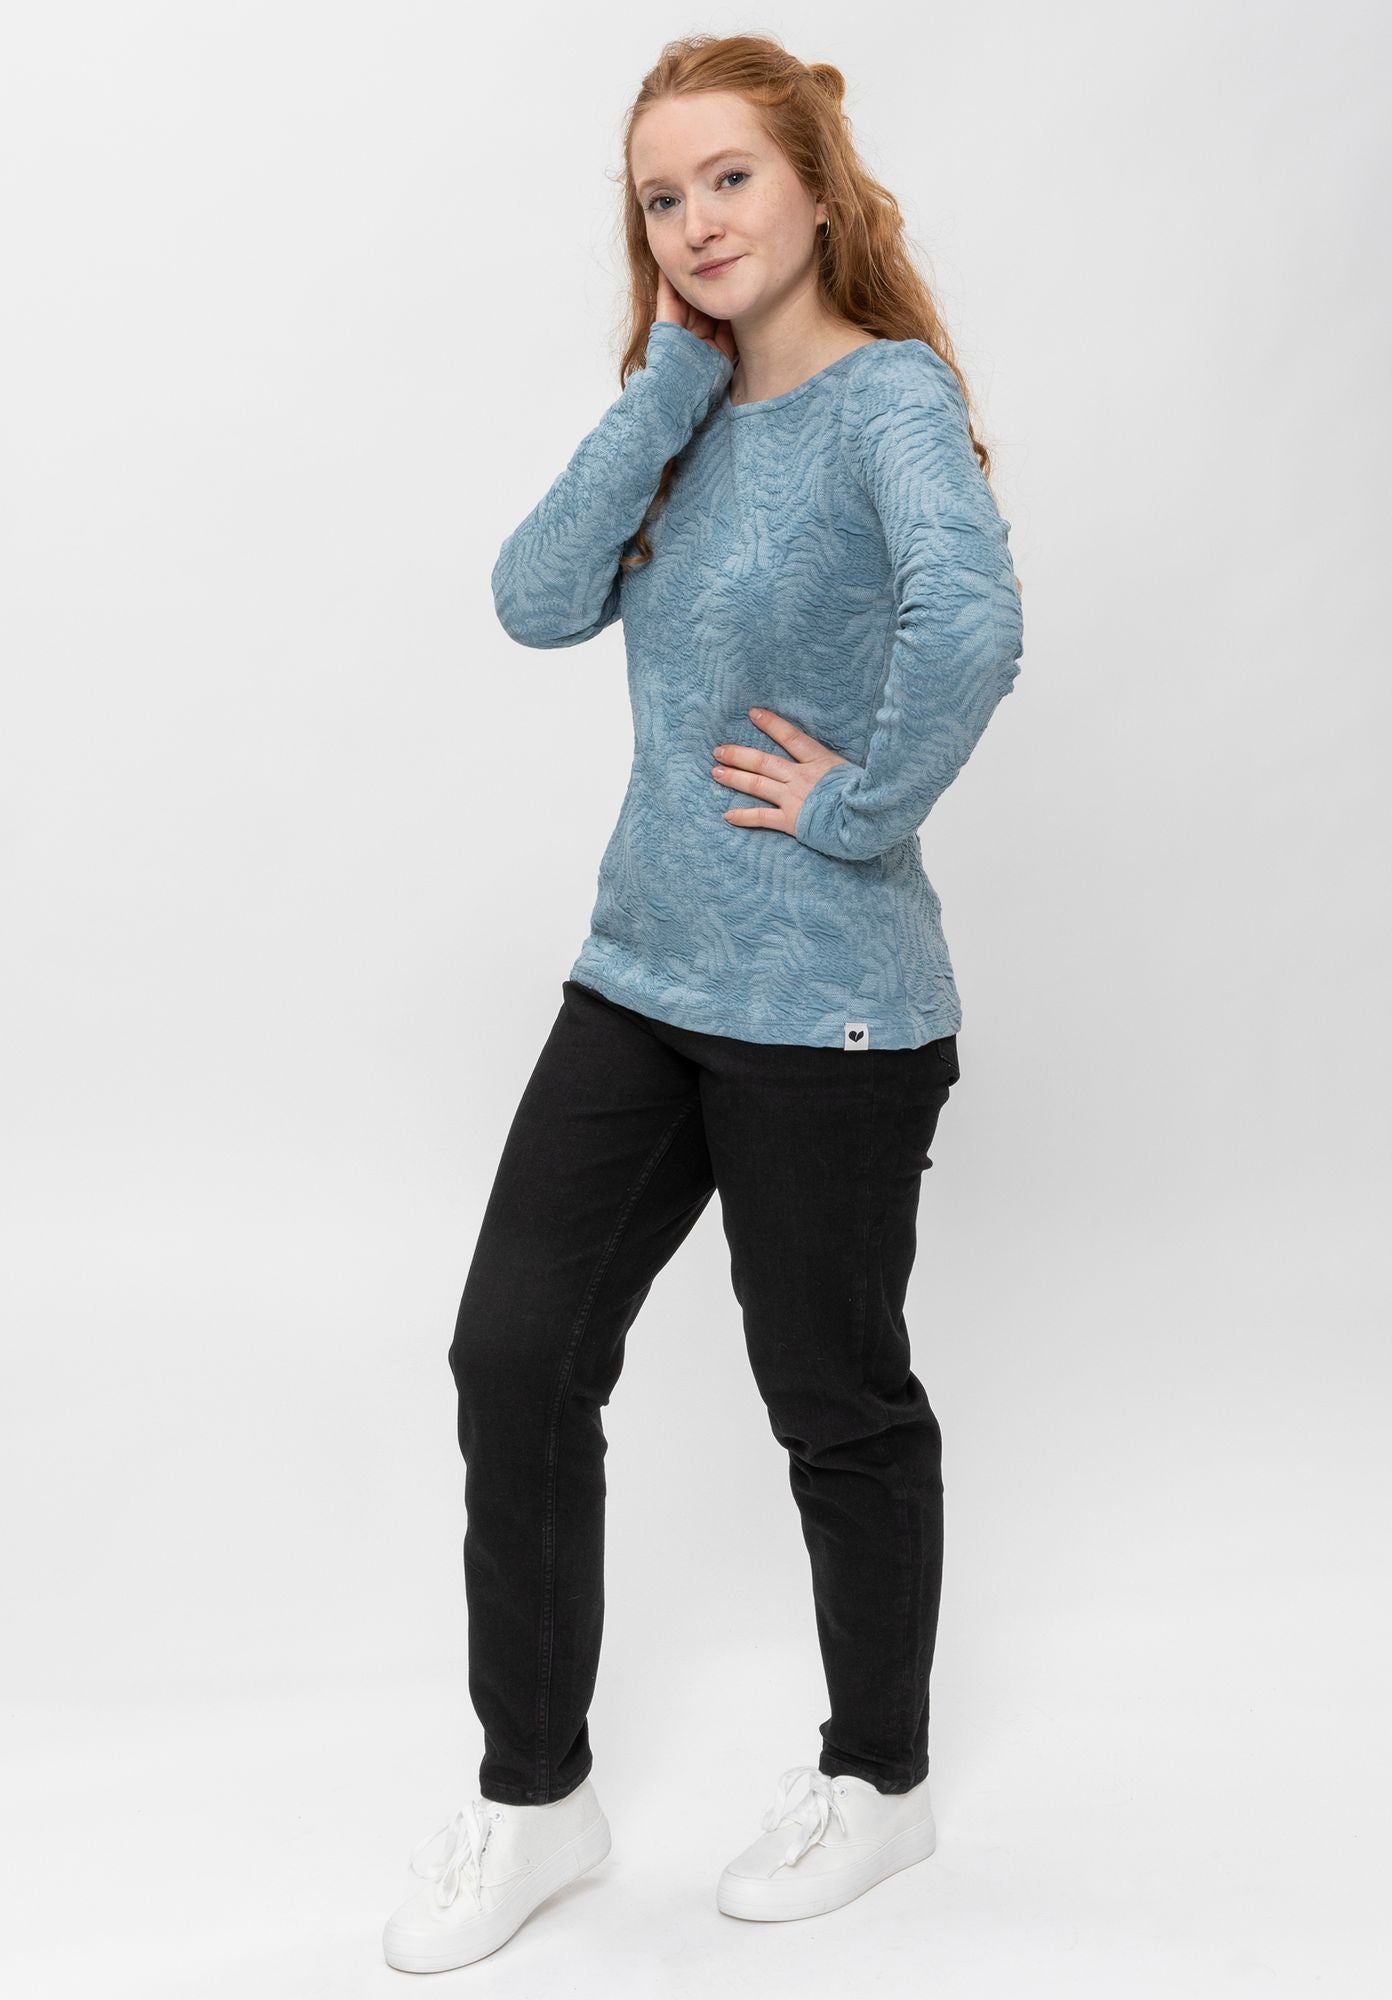 Longsleeve shirt OPPLIA in blue by LOVJOI made of organic cotton (ST)